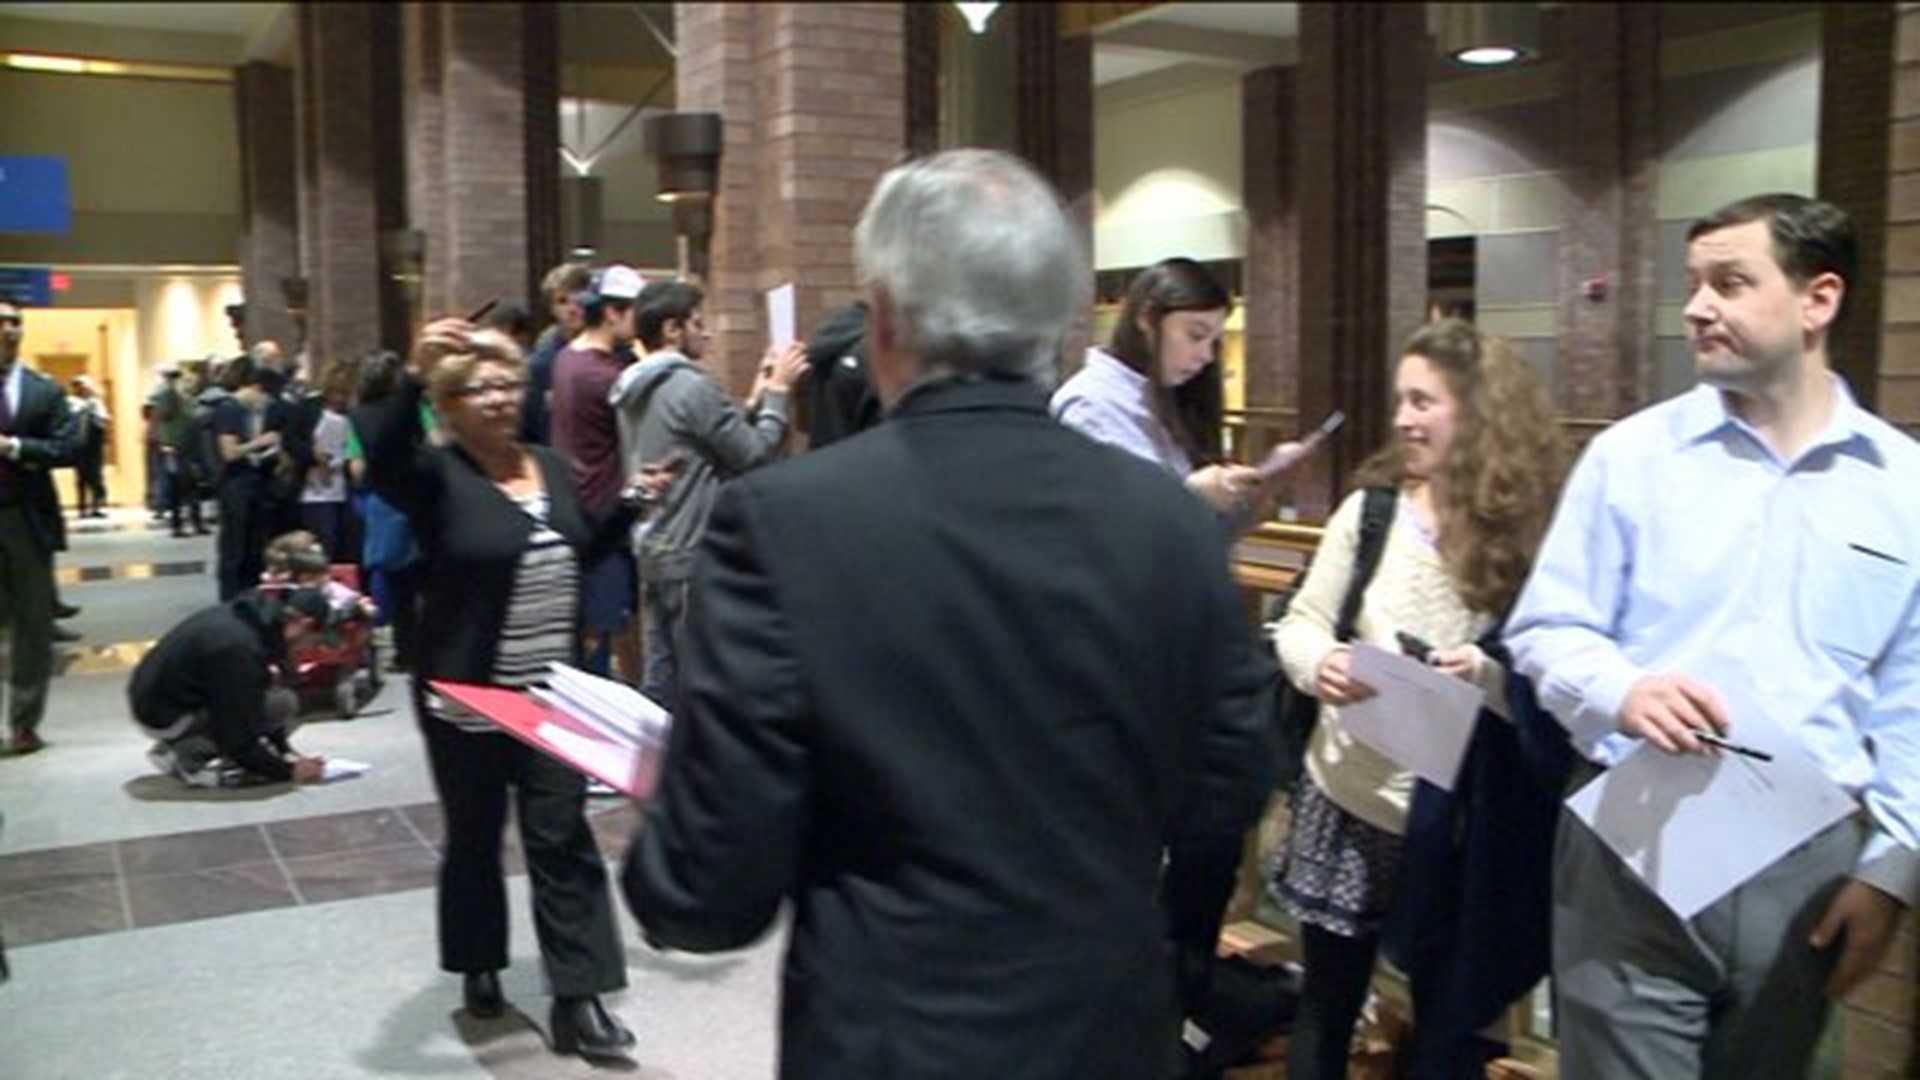 Lines leave some in New Haven unable to vote